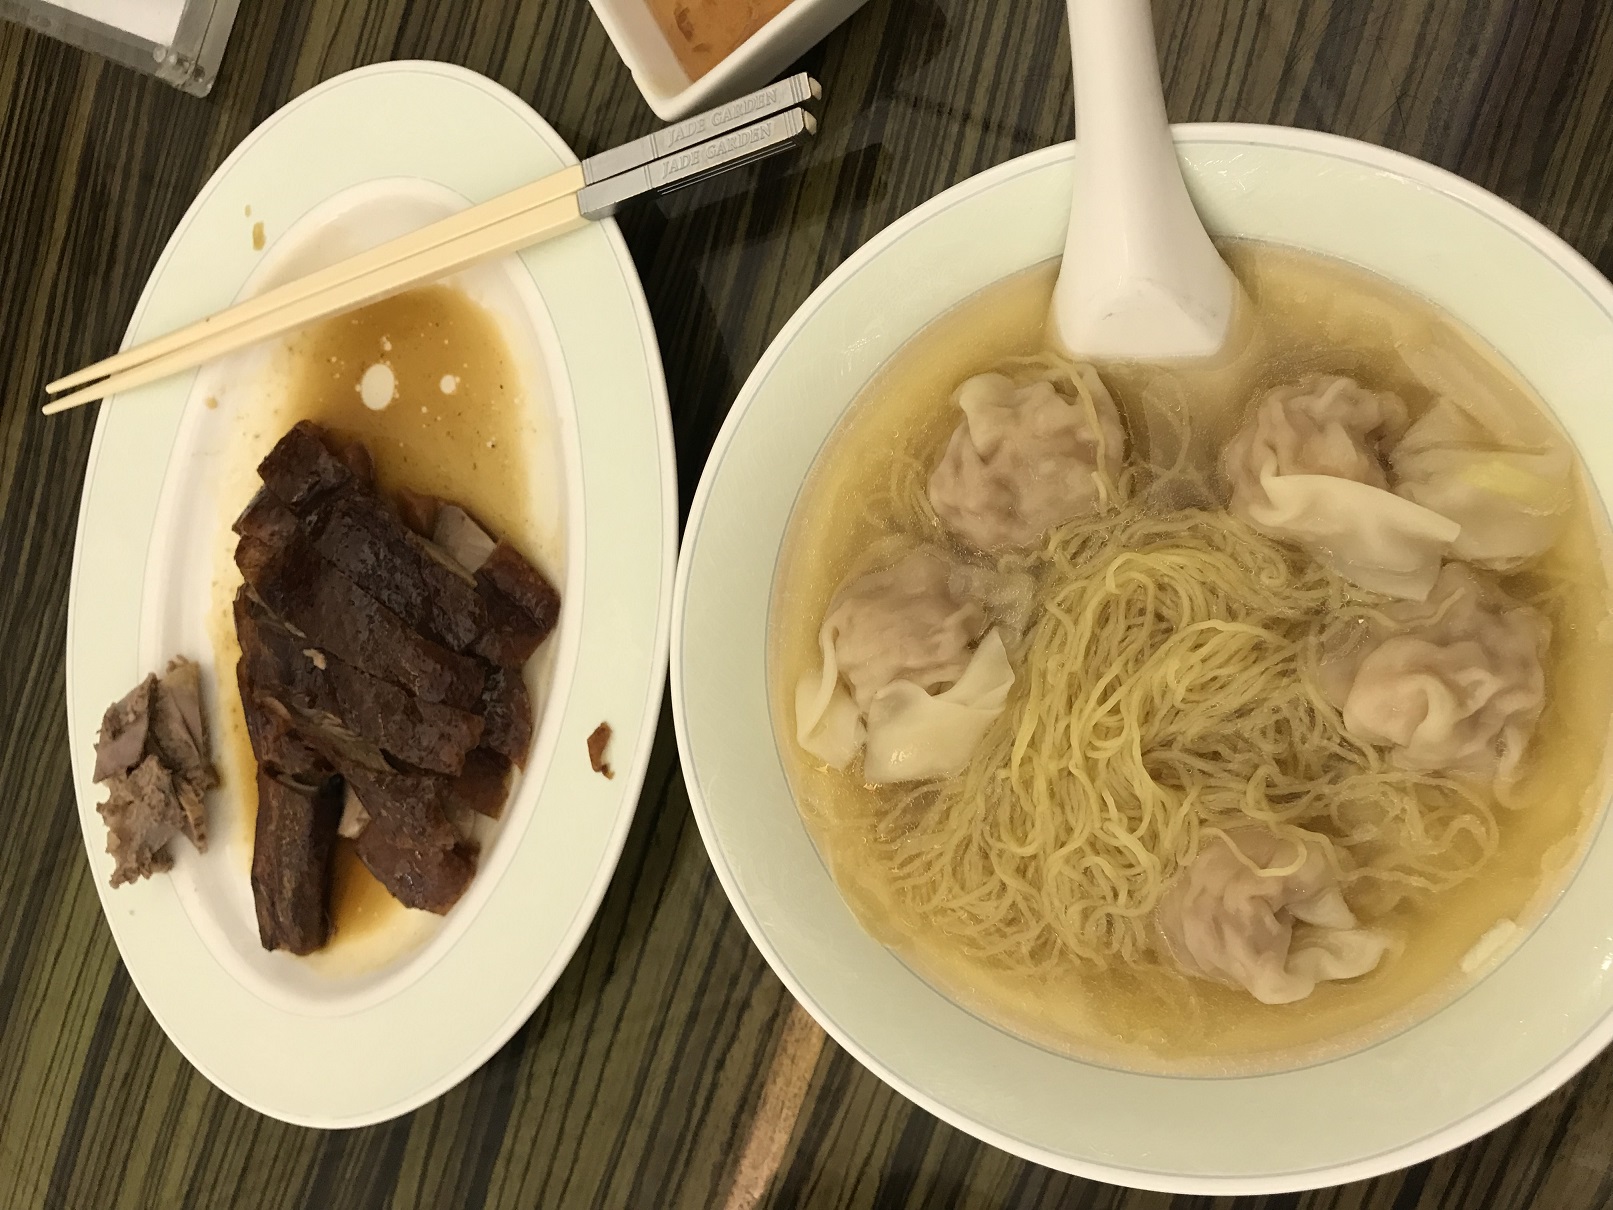 With Wanton Noodles at Jade Garden 美心　at the airport!